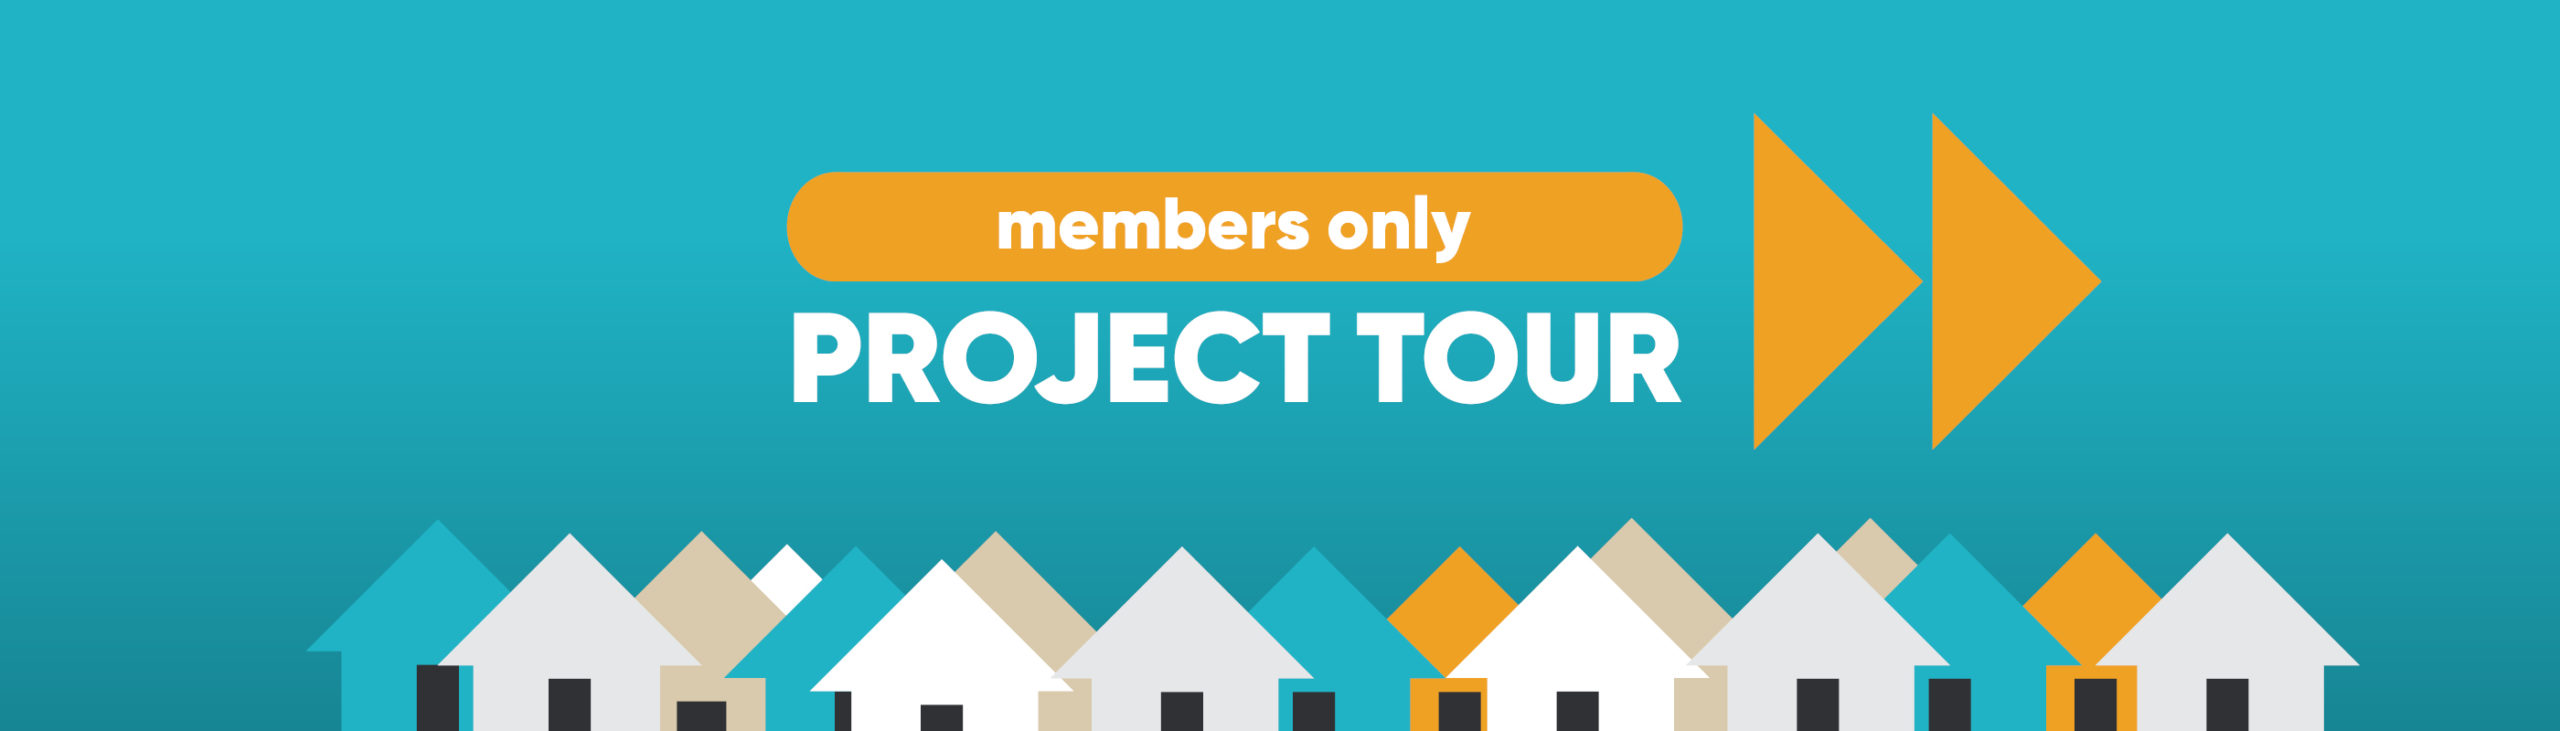 Project Tour web main page no logo scaled